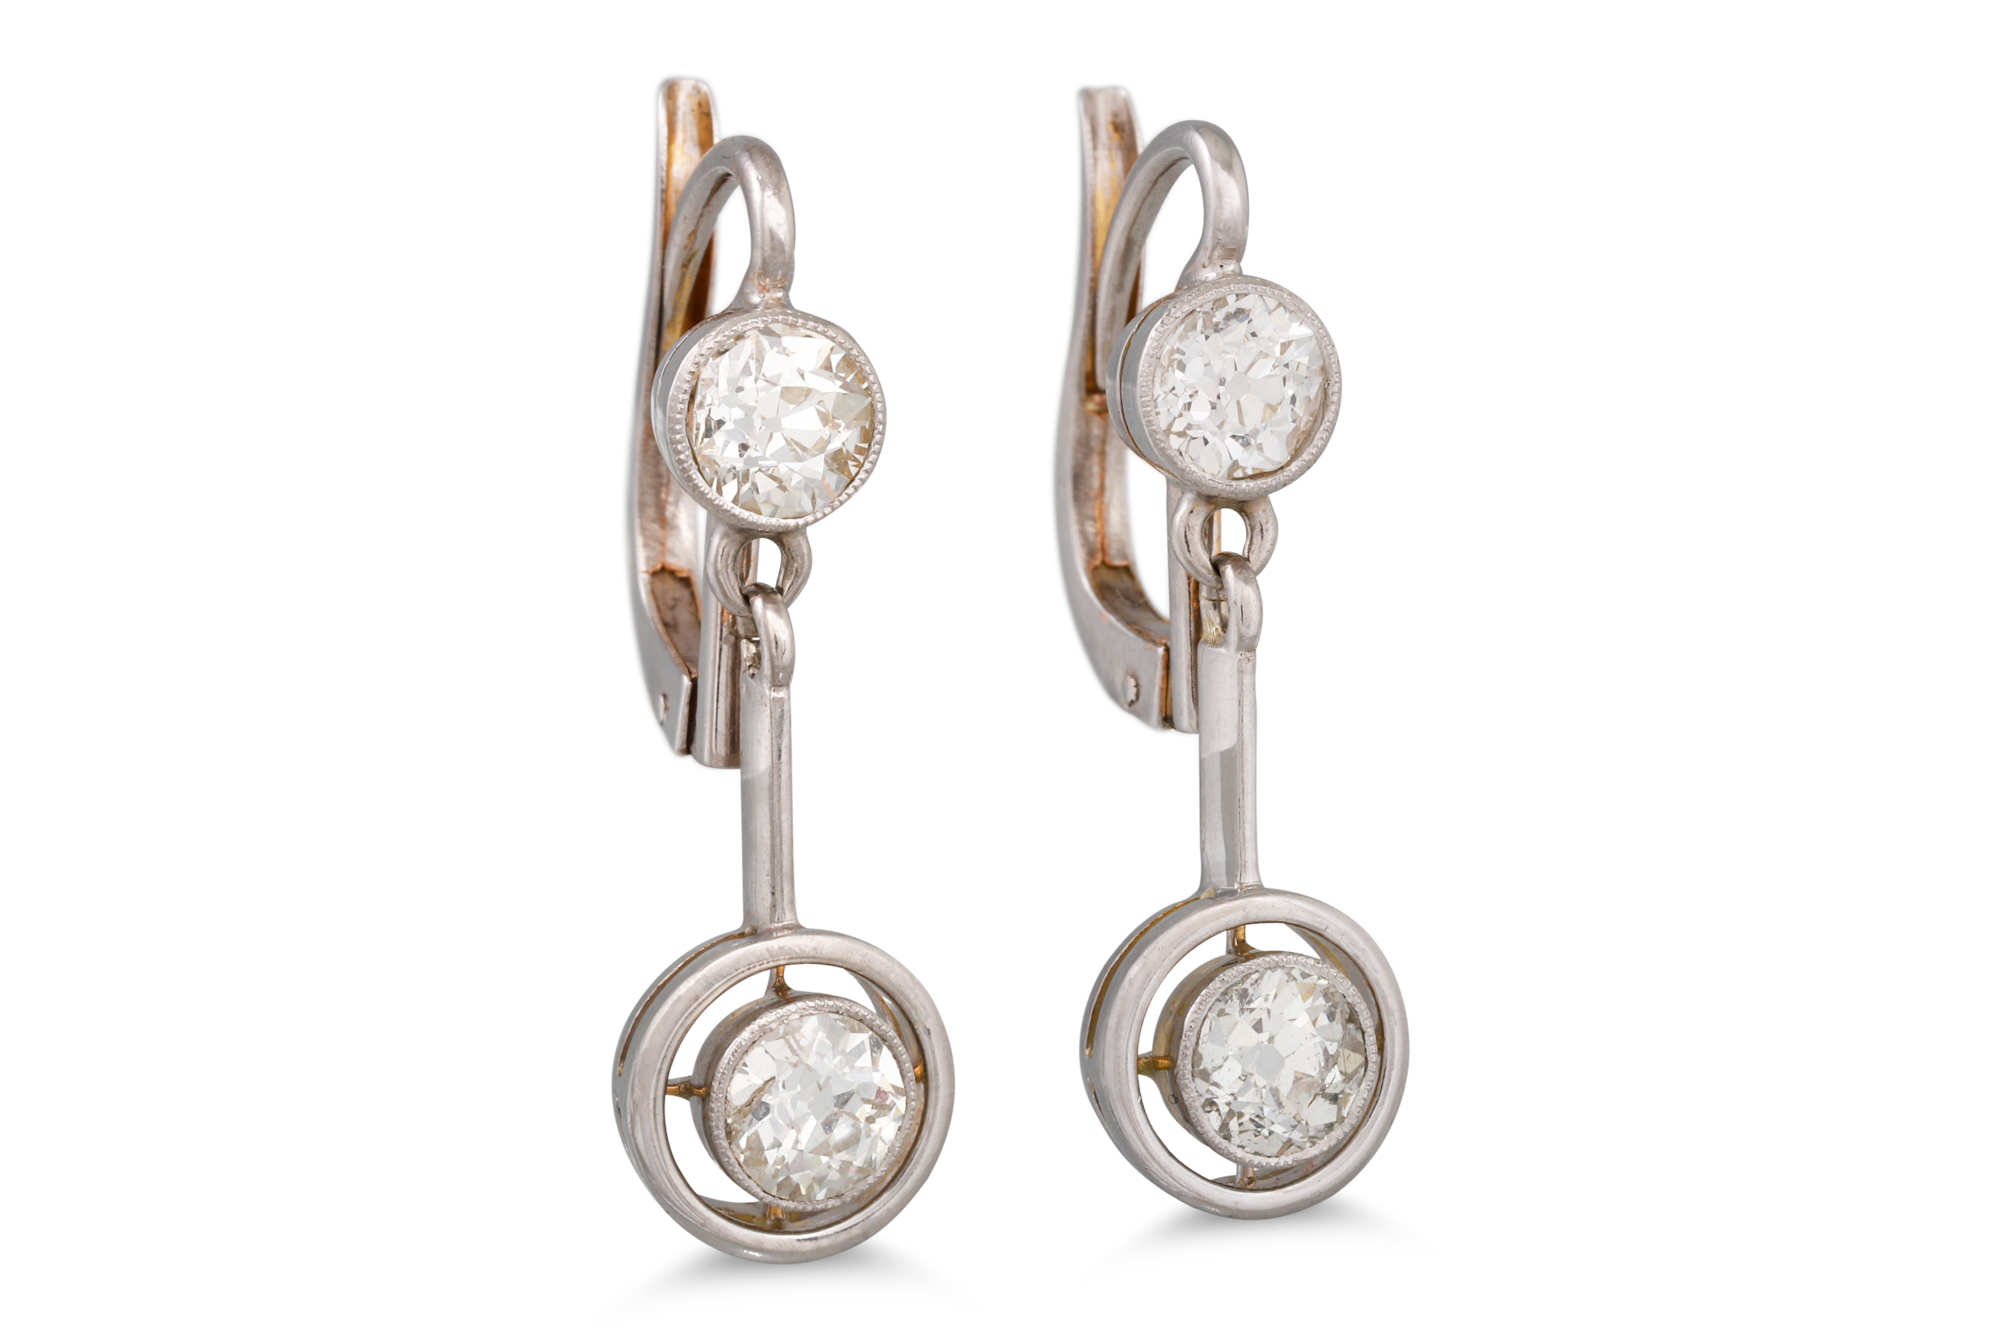 A PAIR OF EARLY 20TH CENTURY DIAMOND DROP EARRINGS, comprising old cut diamond drops suspended